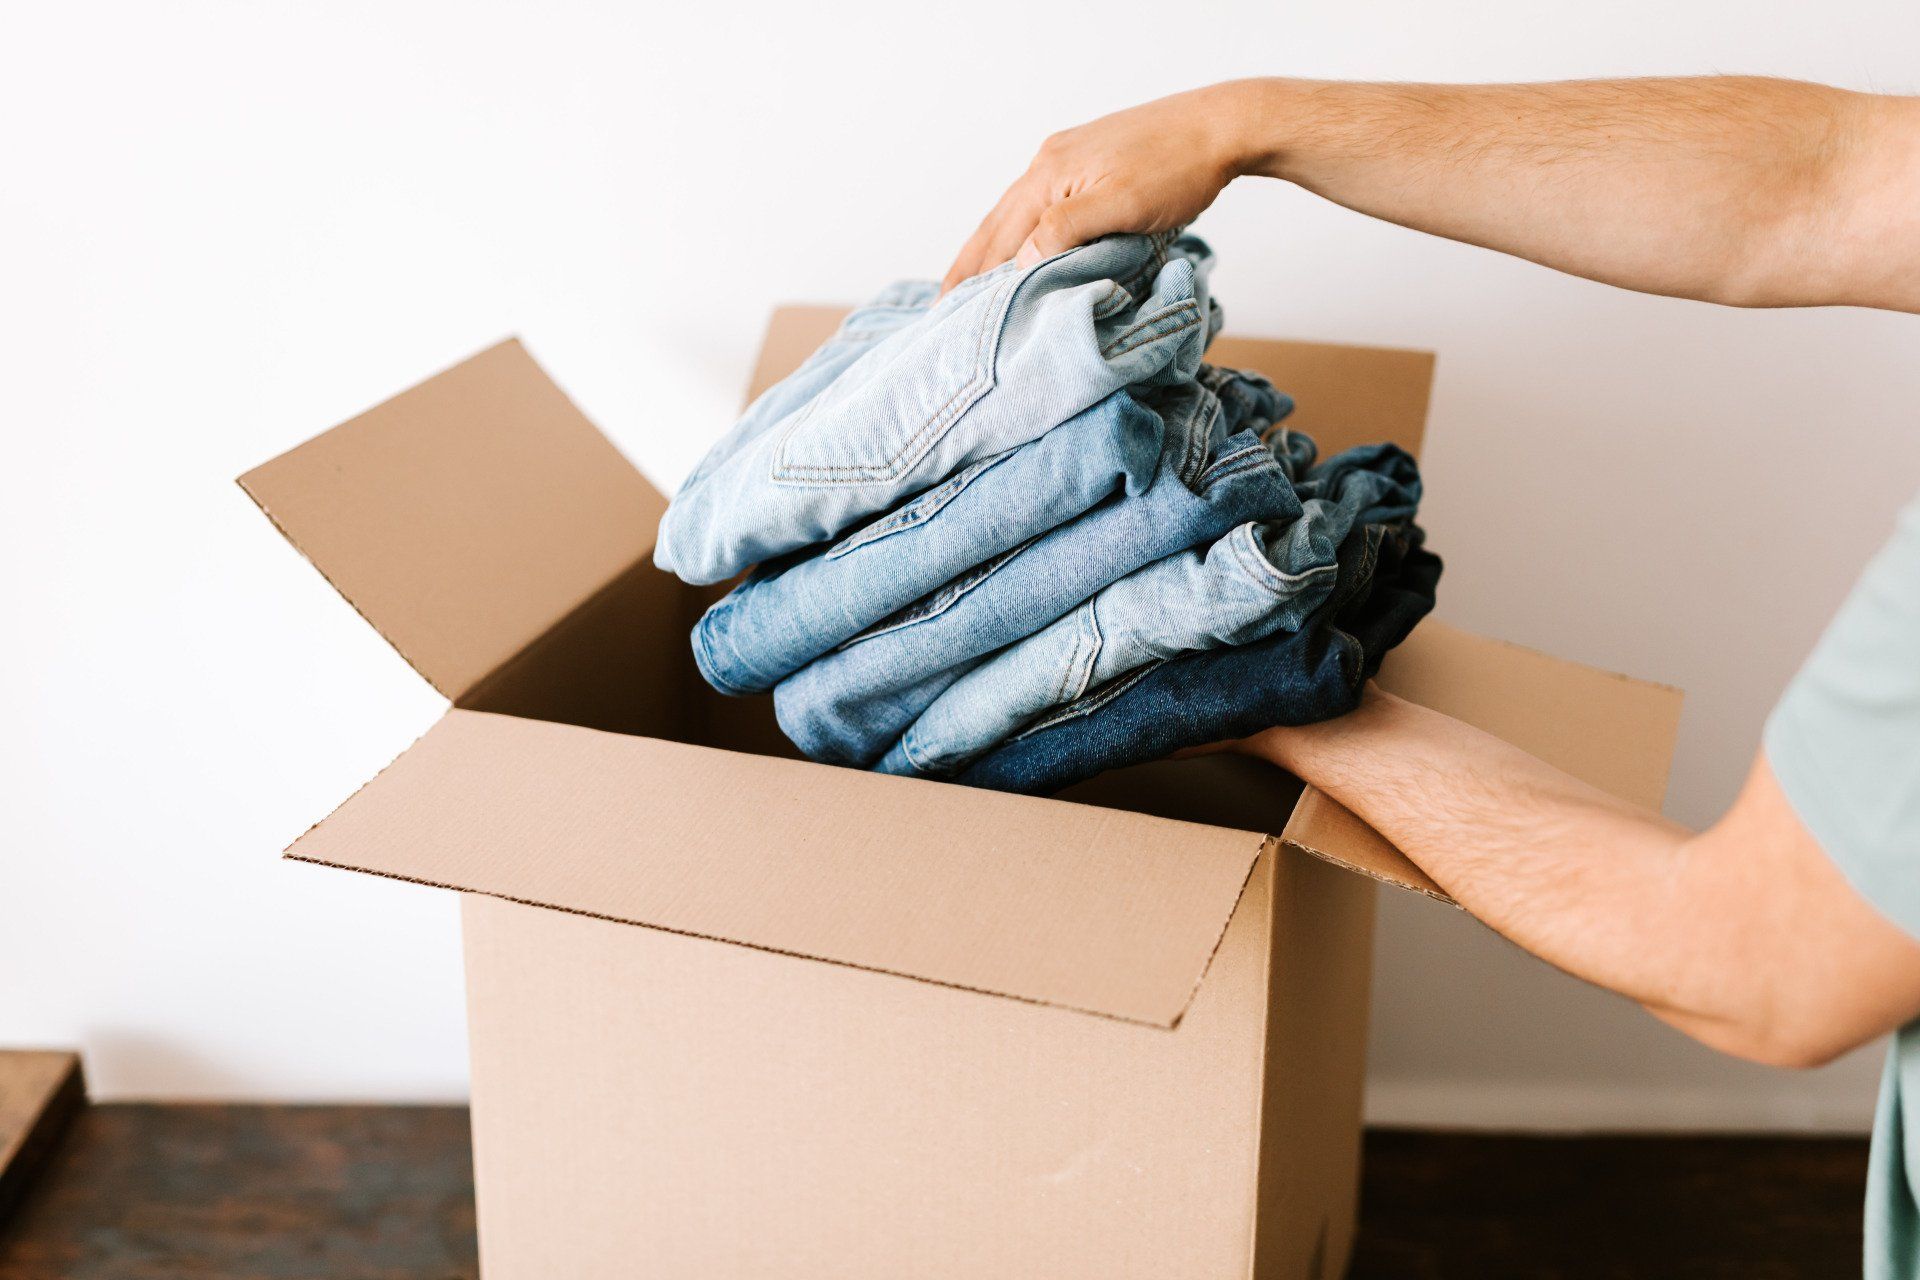 Image of person putting a stack of jeans into a box to donate.